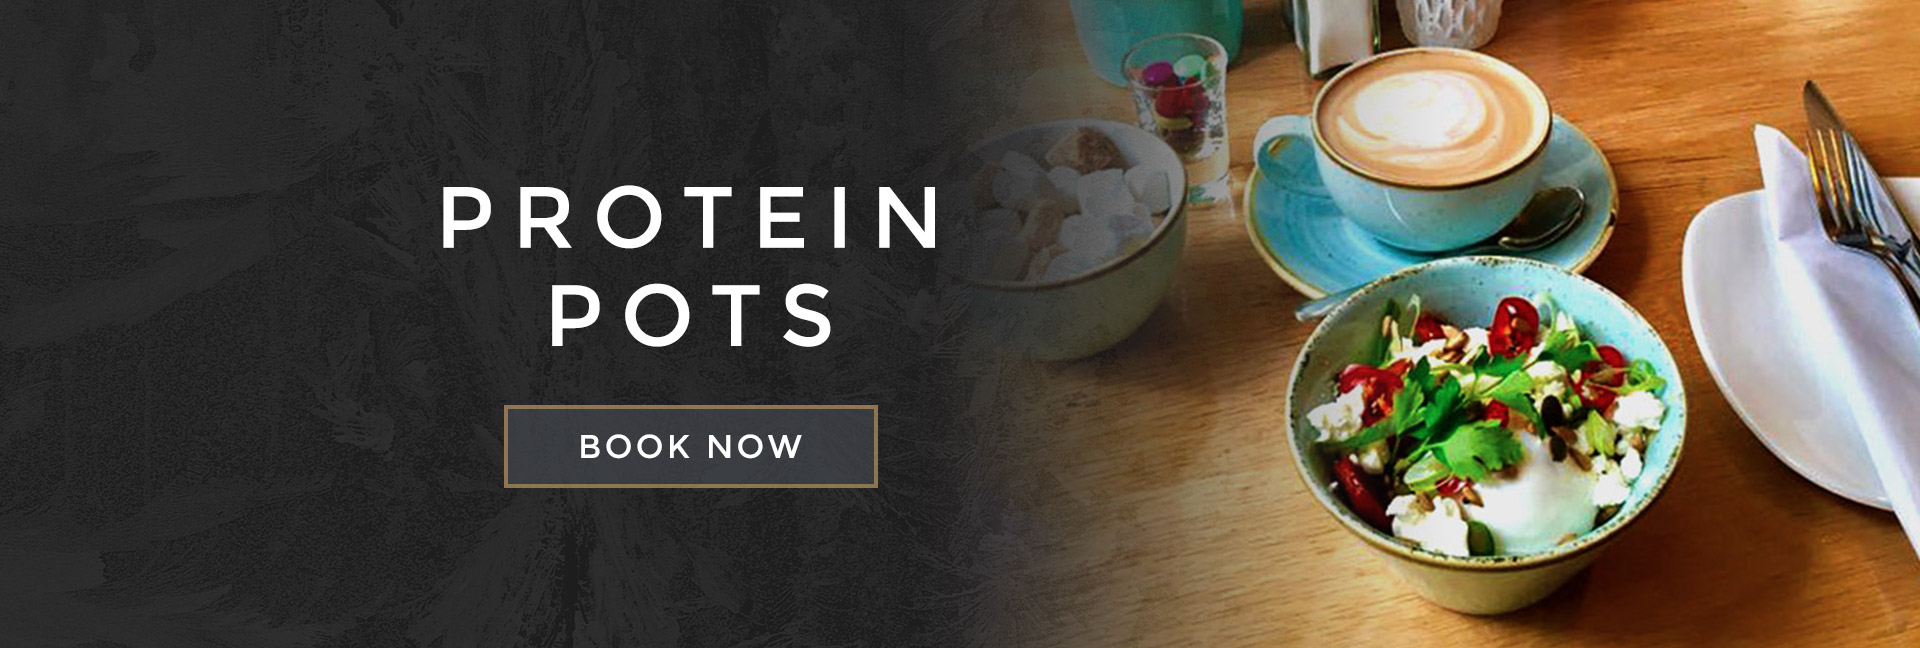 Protein pots at All Bar One Holborn - Book your table